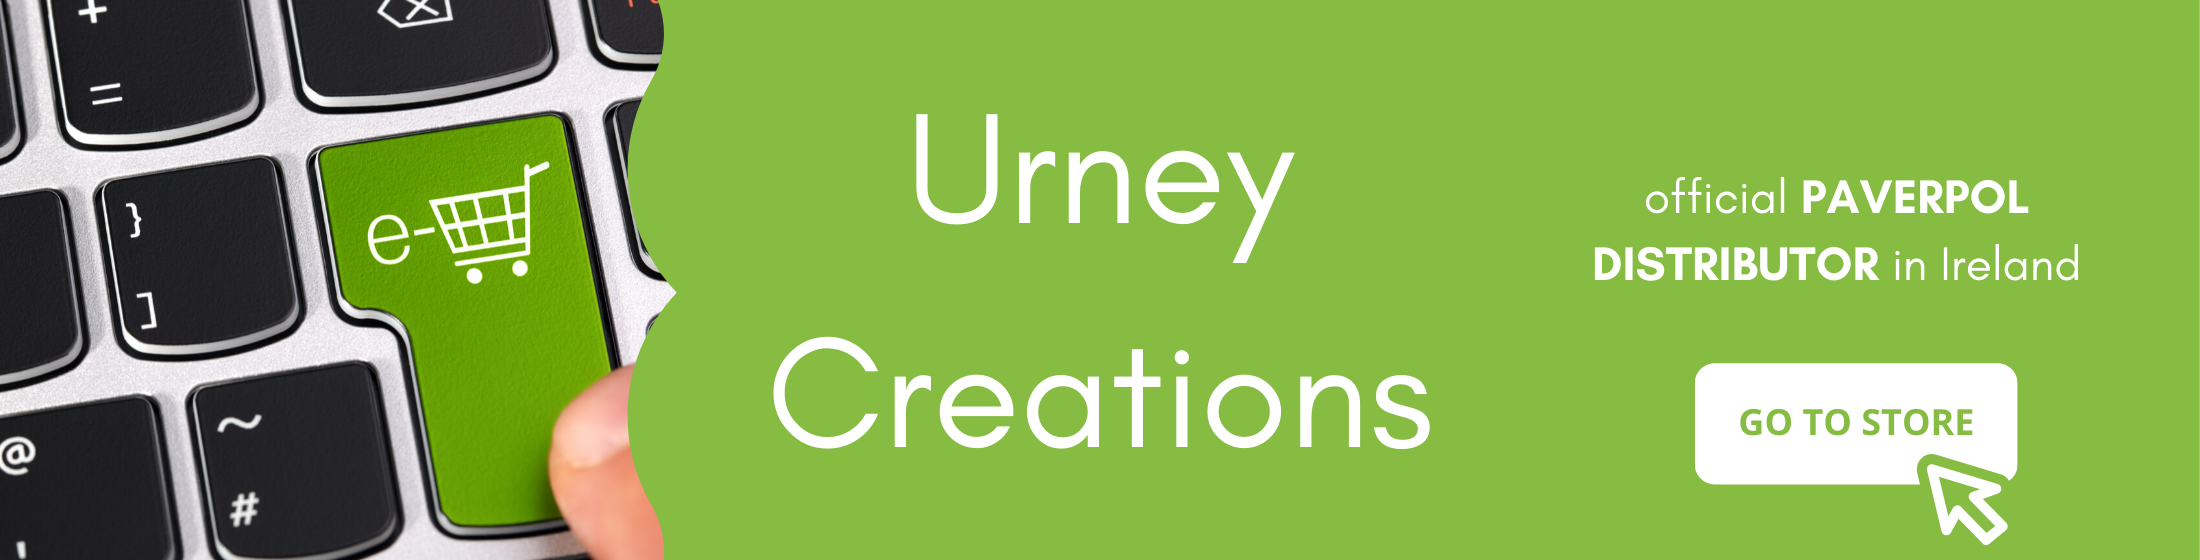 Paverpol Urney Creations Banner